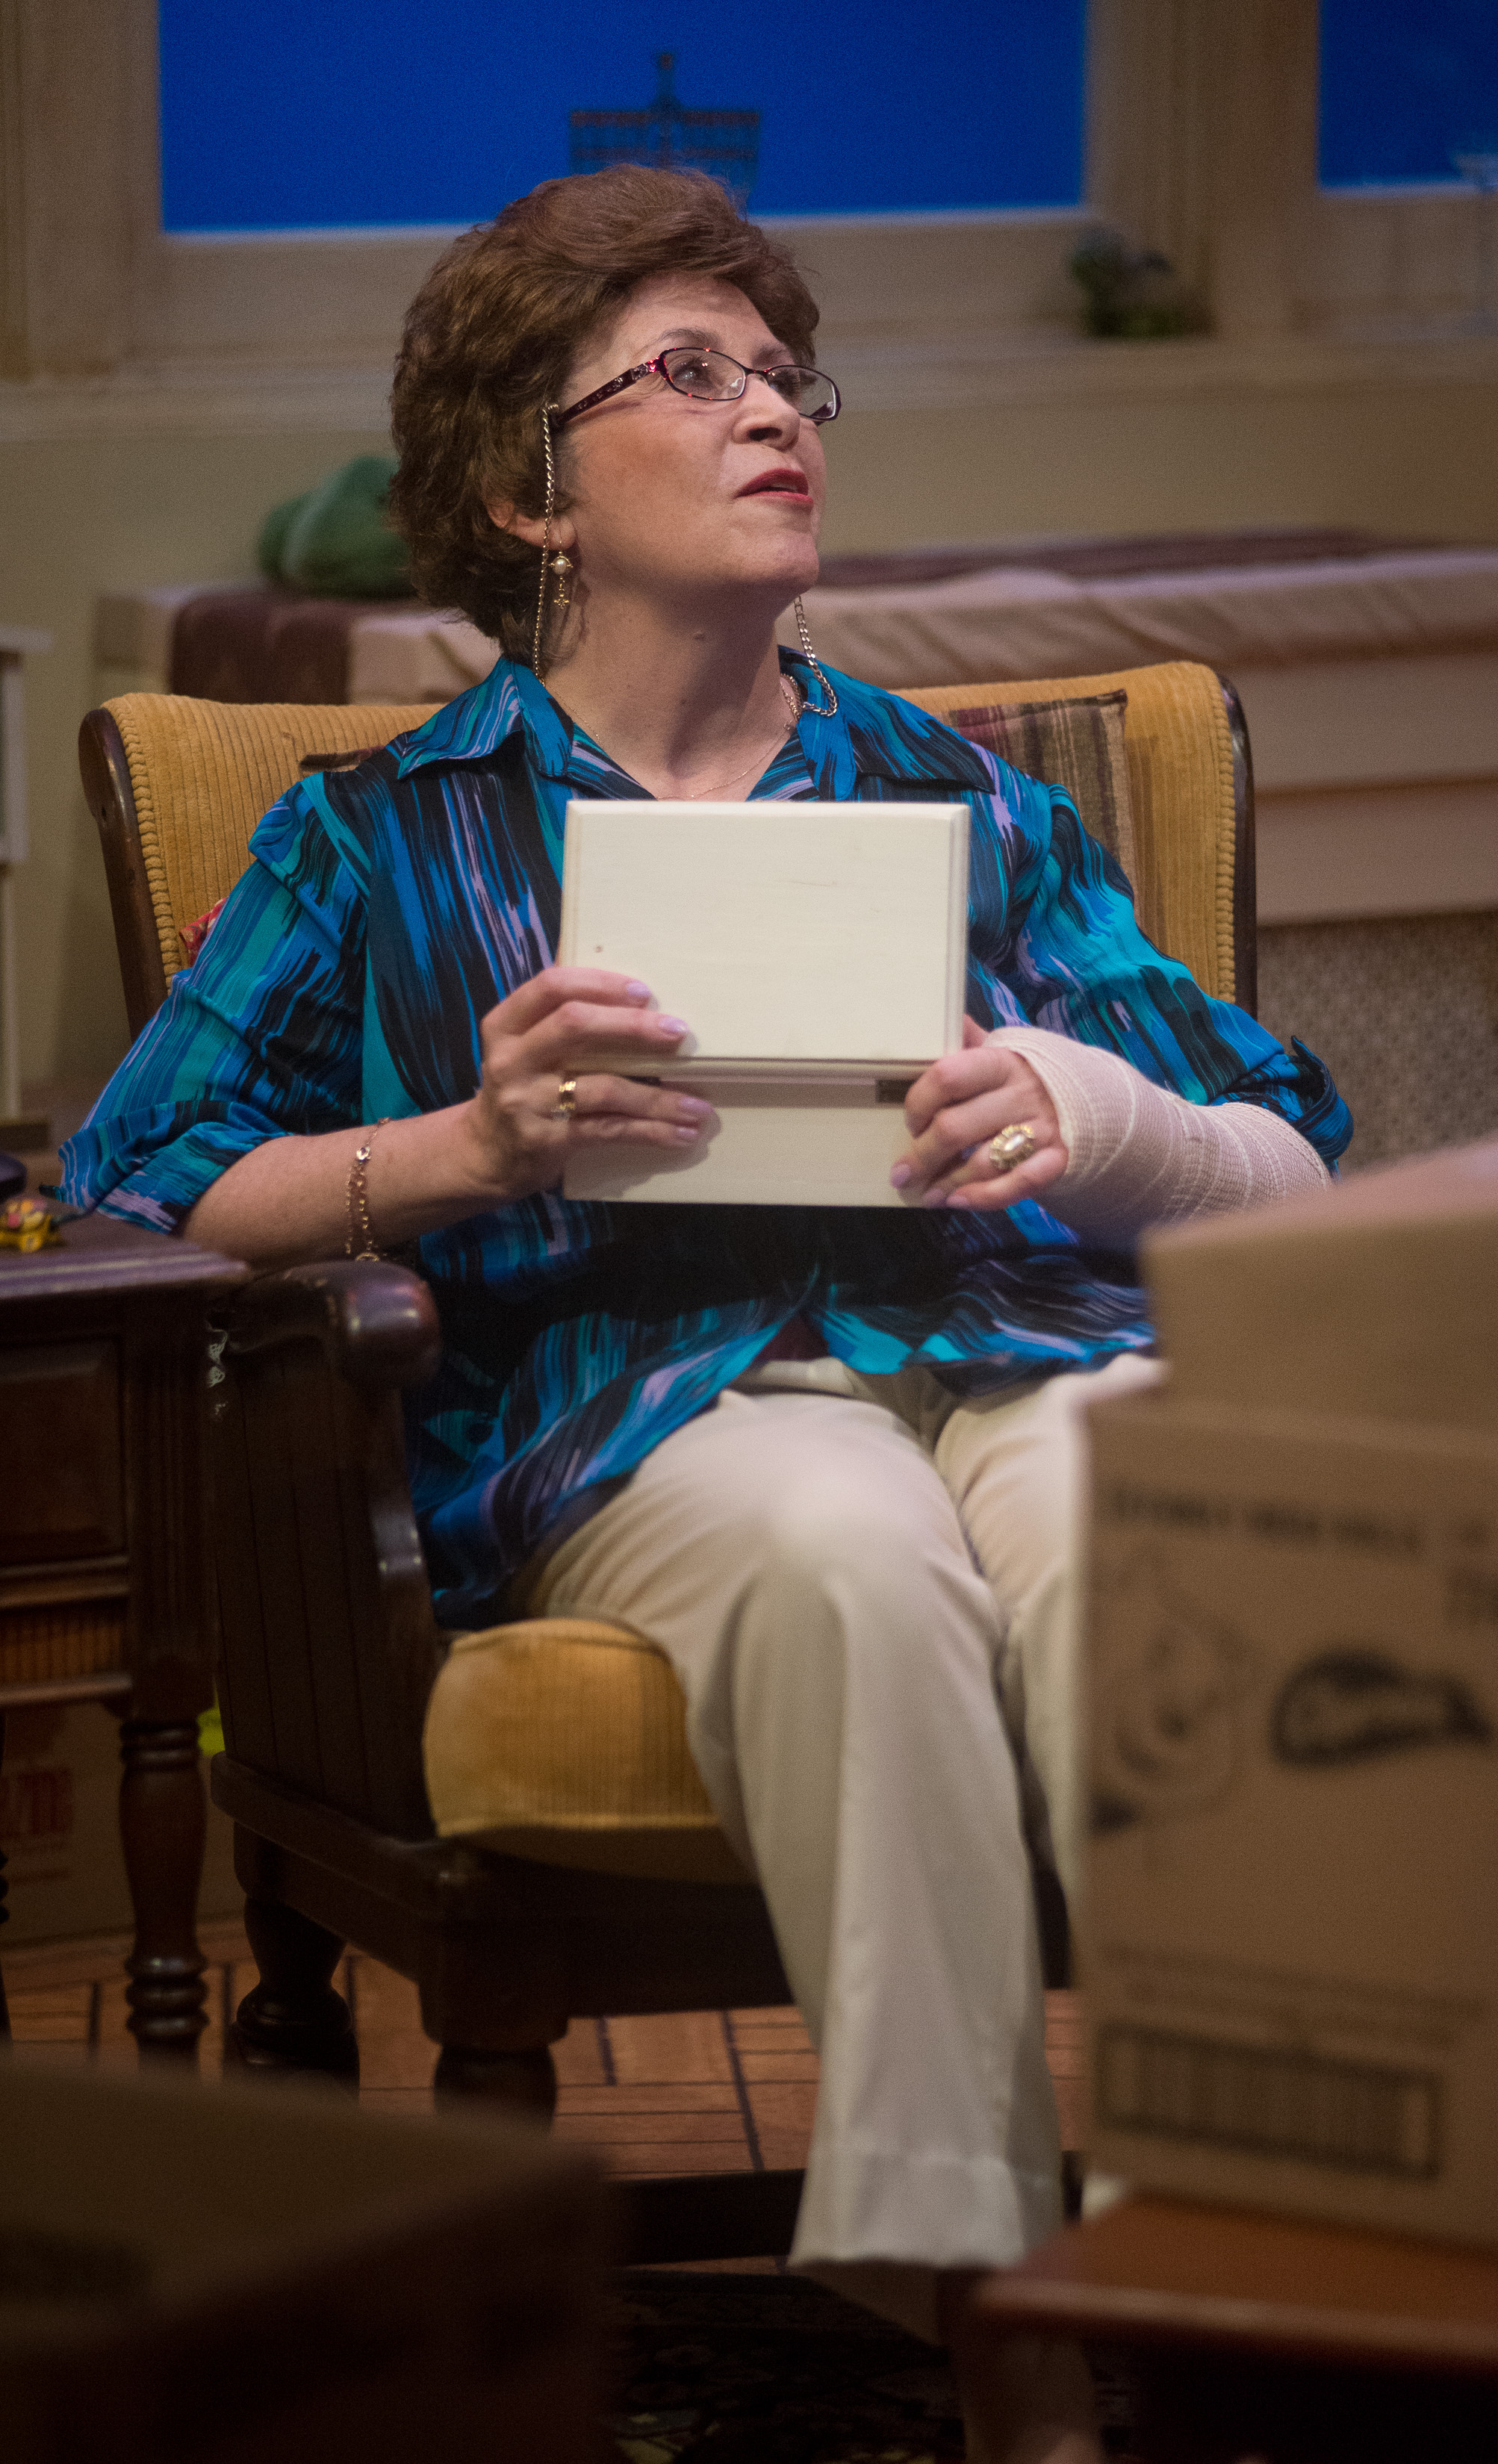 Maura O'Brien holds a music box to her chest remembering a childhood lullabye. photo courtesy of Robert Eddy